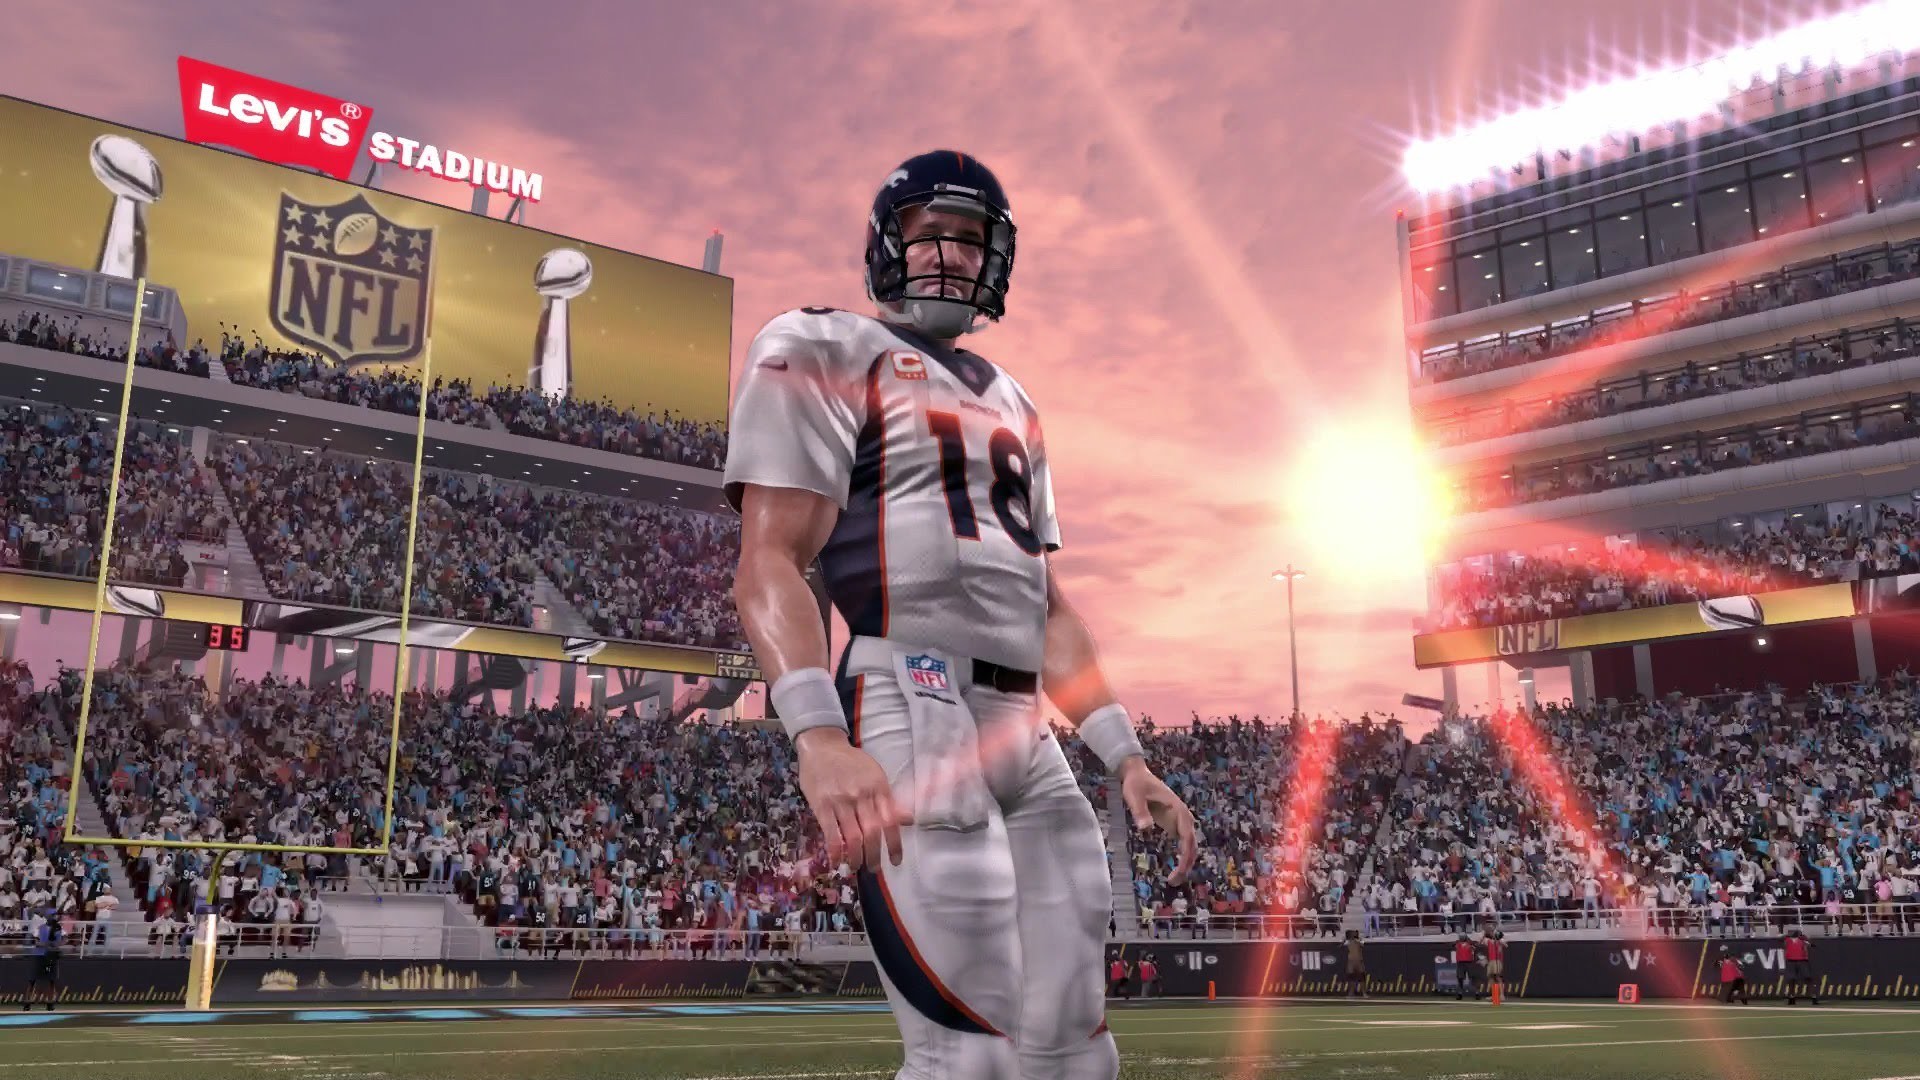 1920x1080 SUPER BOWL 50 MADDEN SIMULATION WAS CRAZY ACCURATE - Broncos vs Panthers  Madden NFL 16 - YouTube